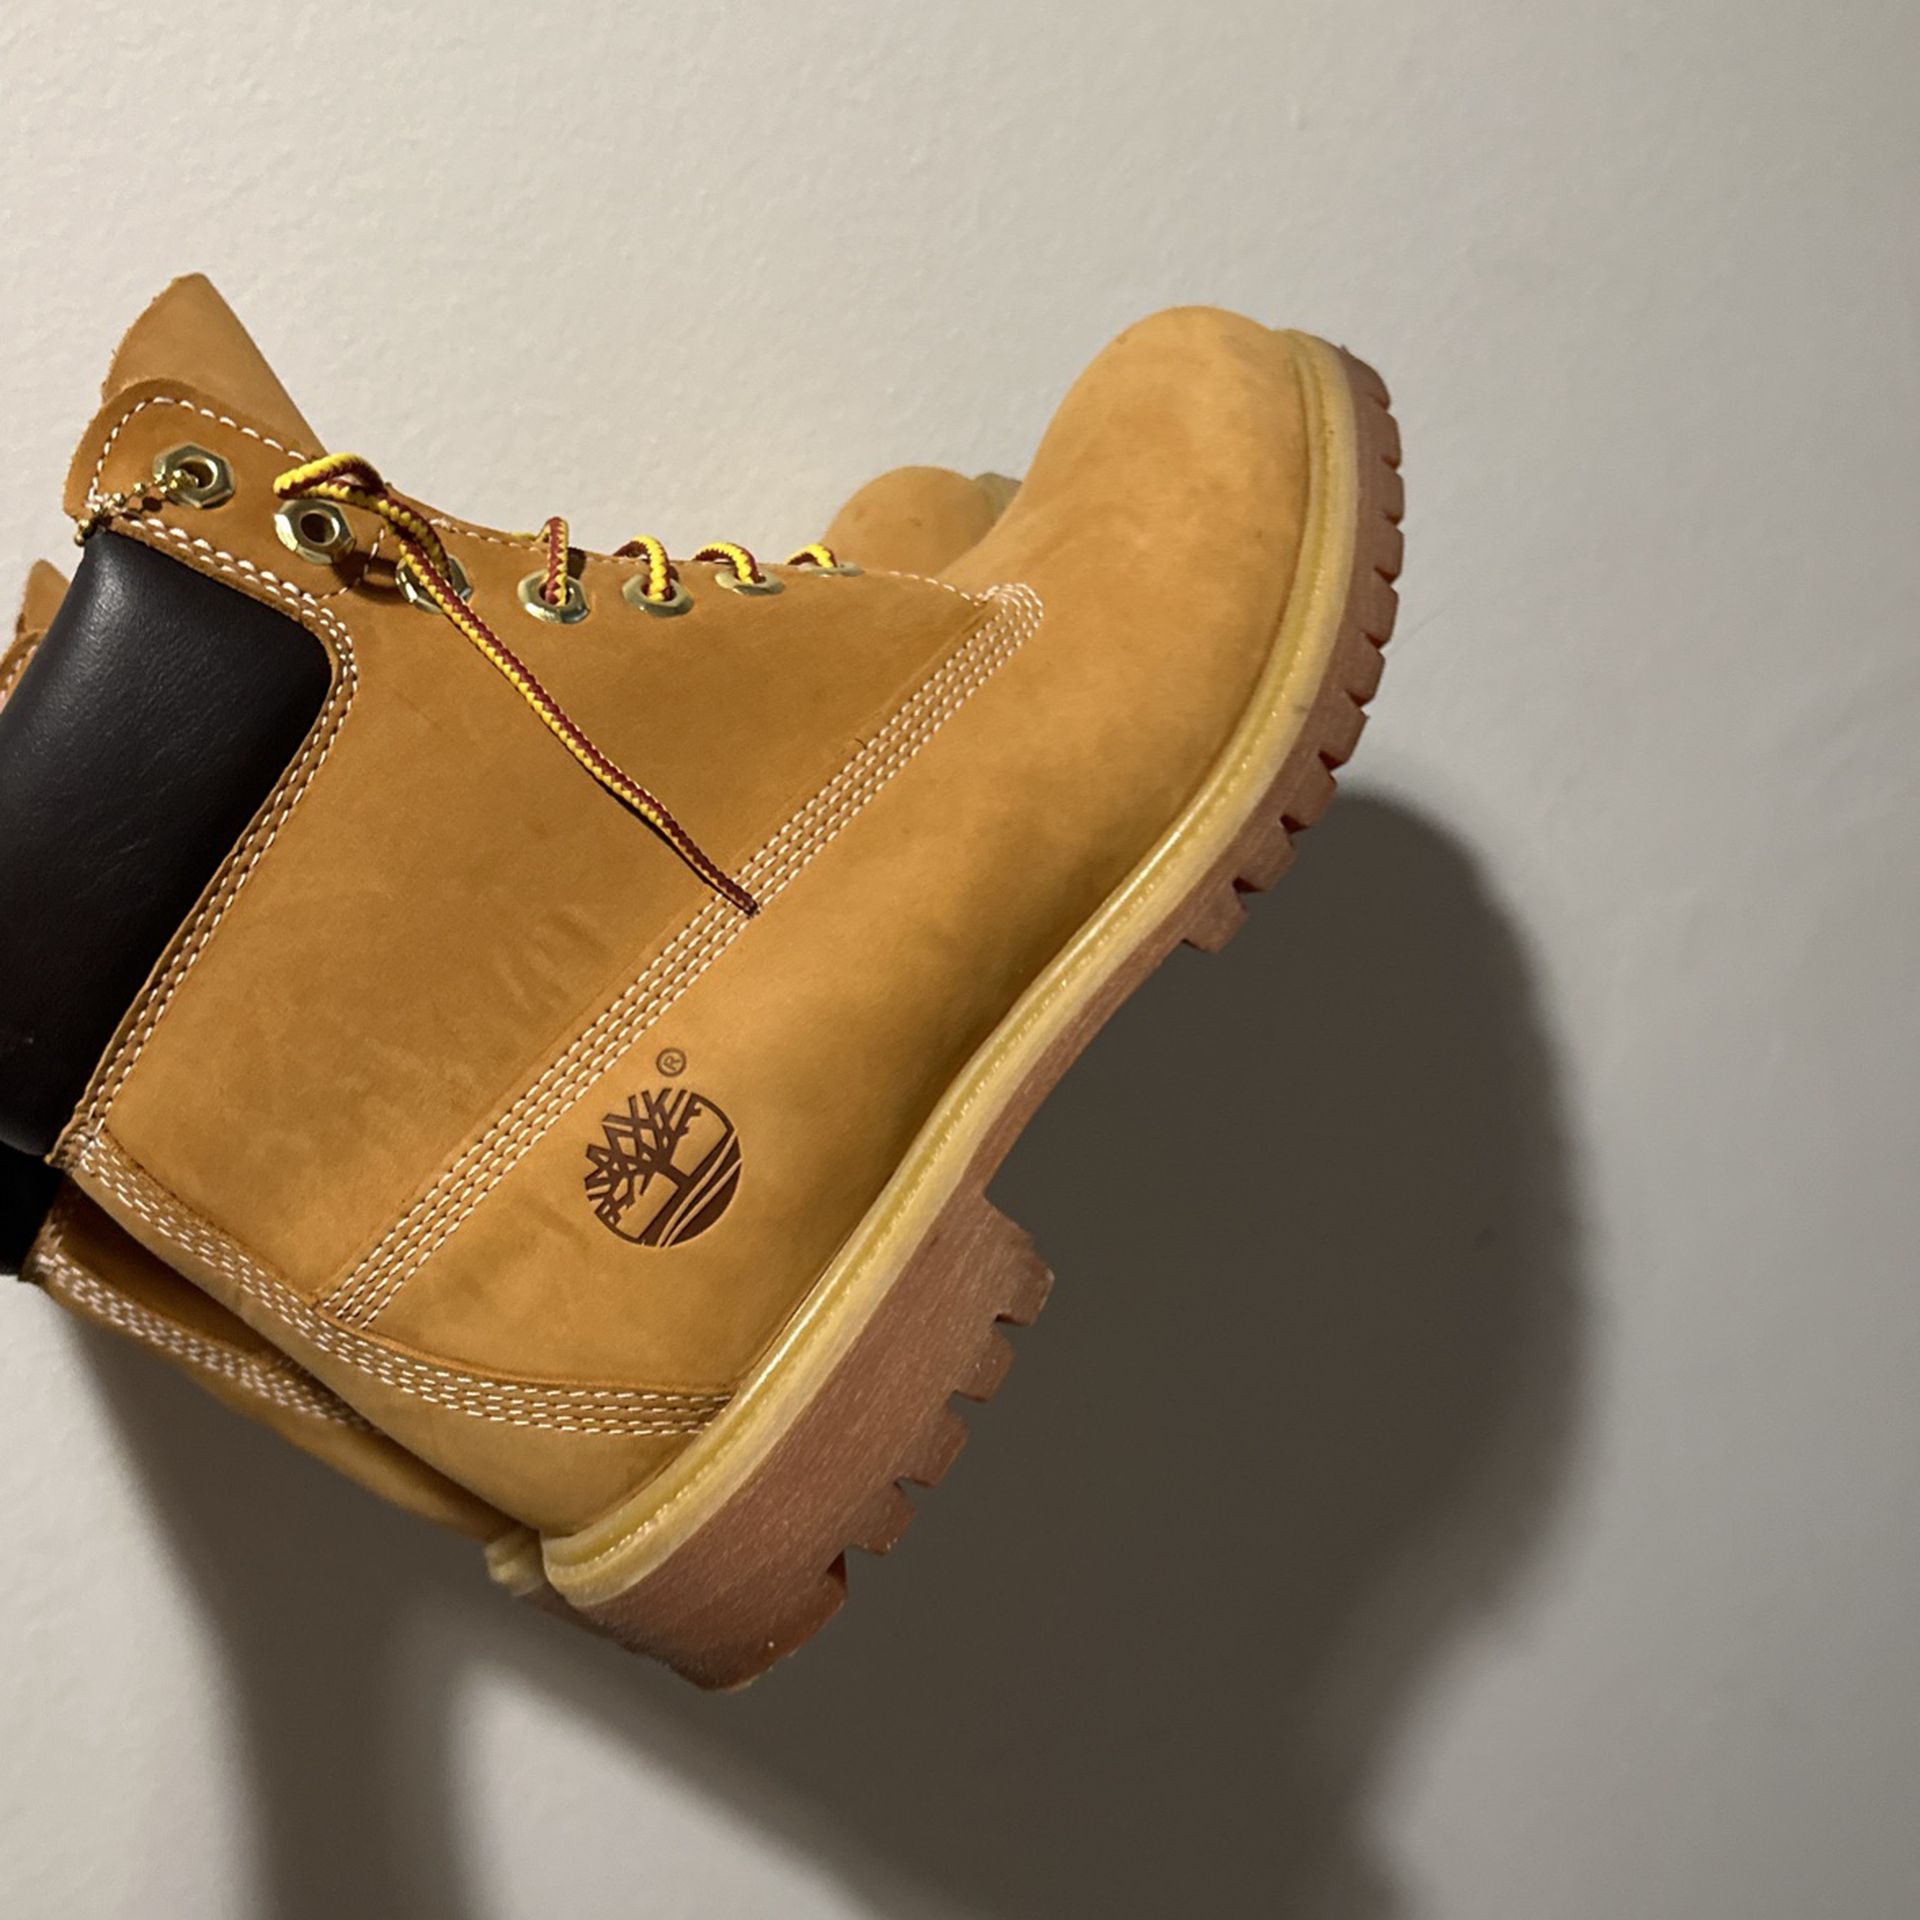 Wheat Timberland 6in Used